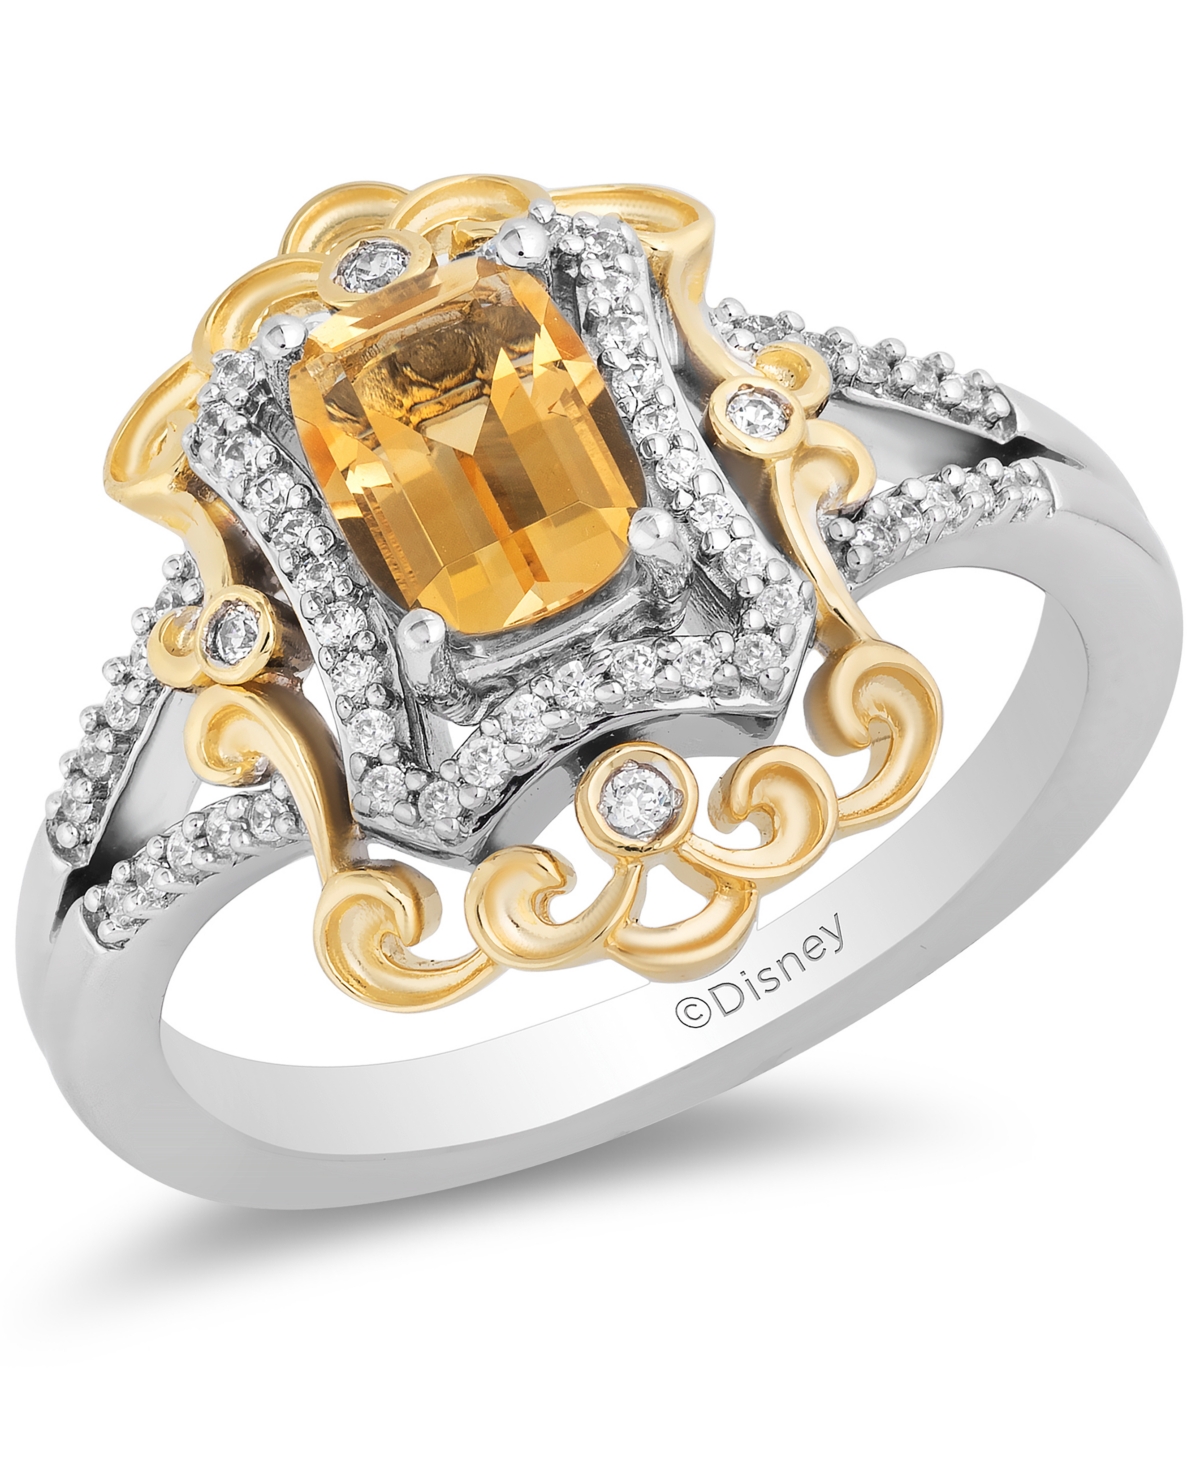 ENCHANTED DISNEY FINE JEWELRY CITRINE (7/8 CT. T.W.) & DIAMOND (1/5 CT. T.W.) BELLE 30TH ANNIVERSARY RING IN STERLING SILVER & 14K